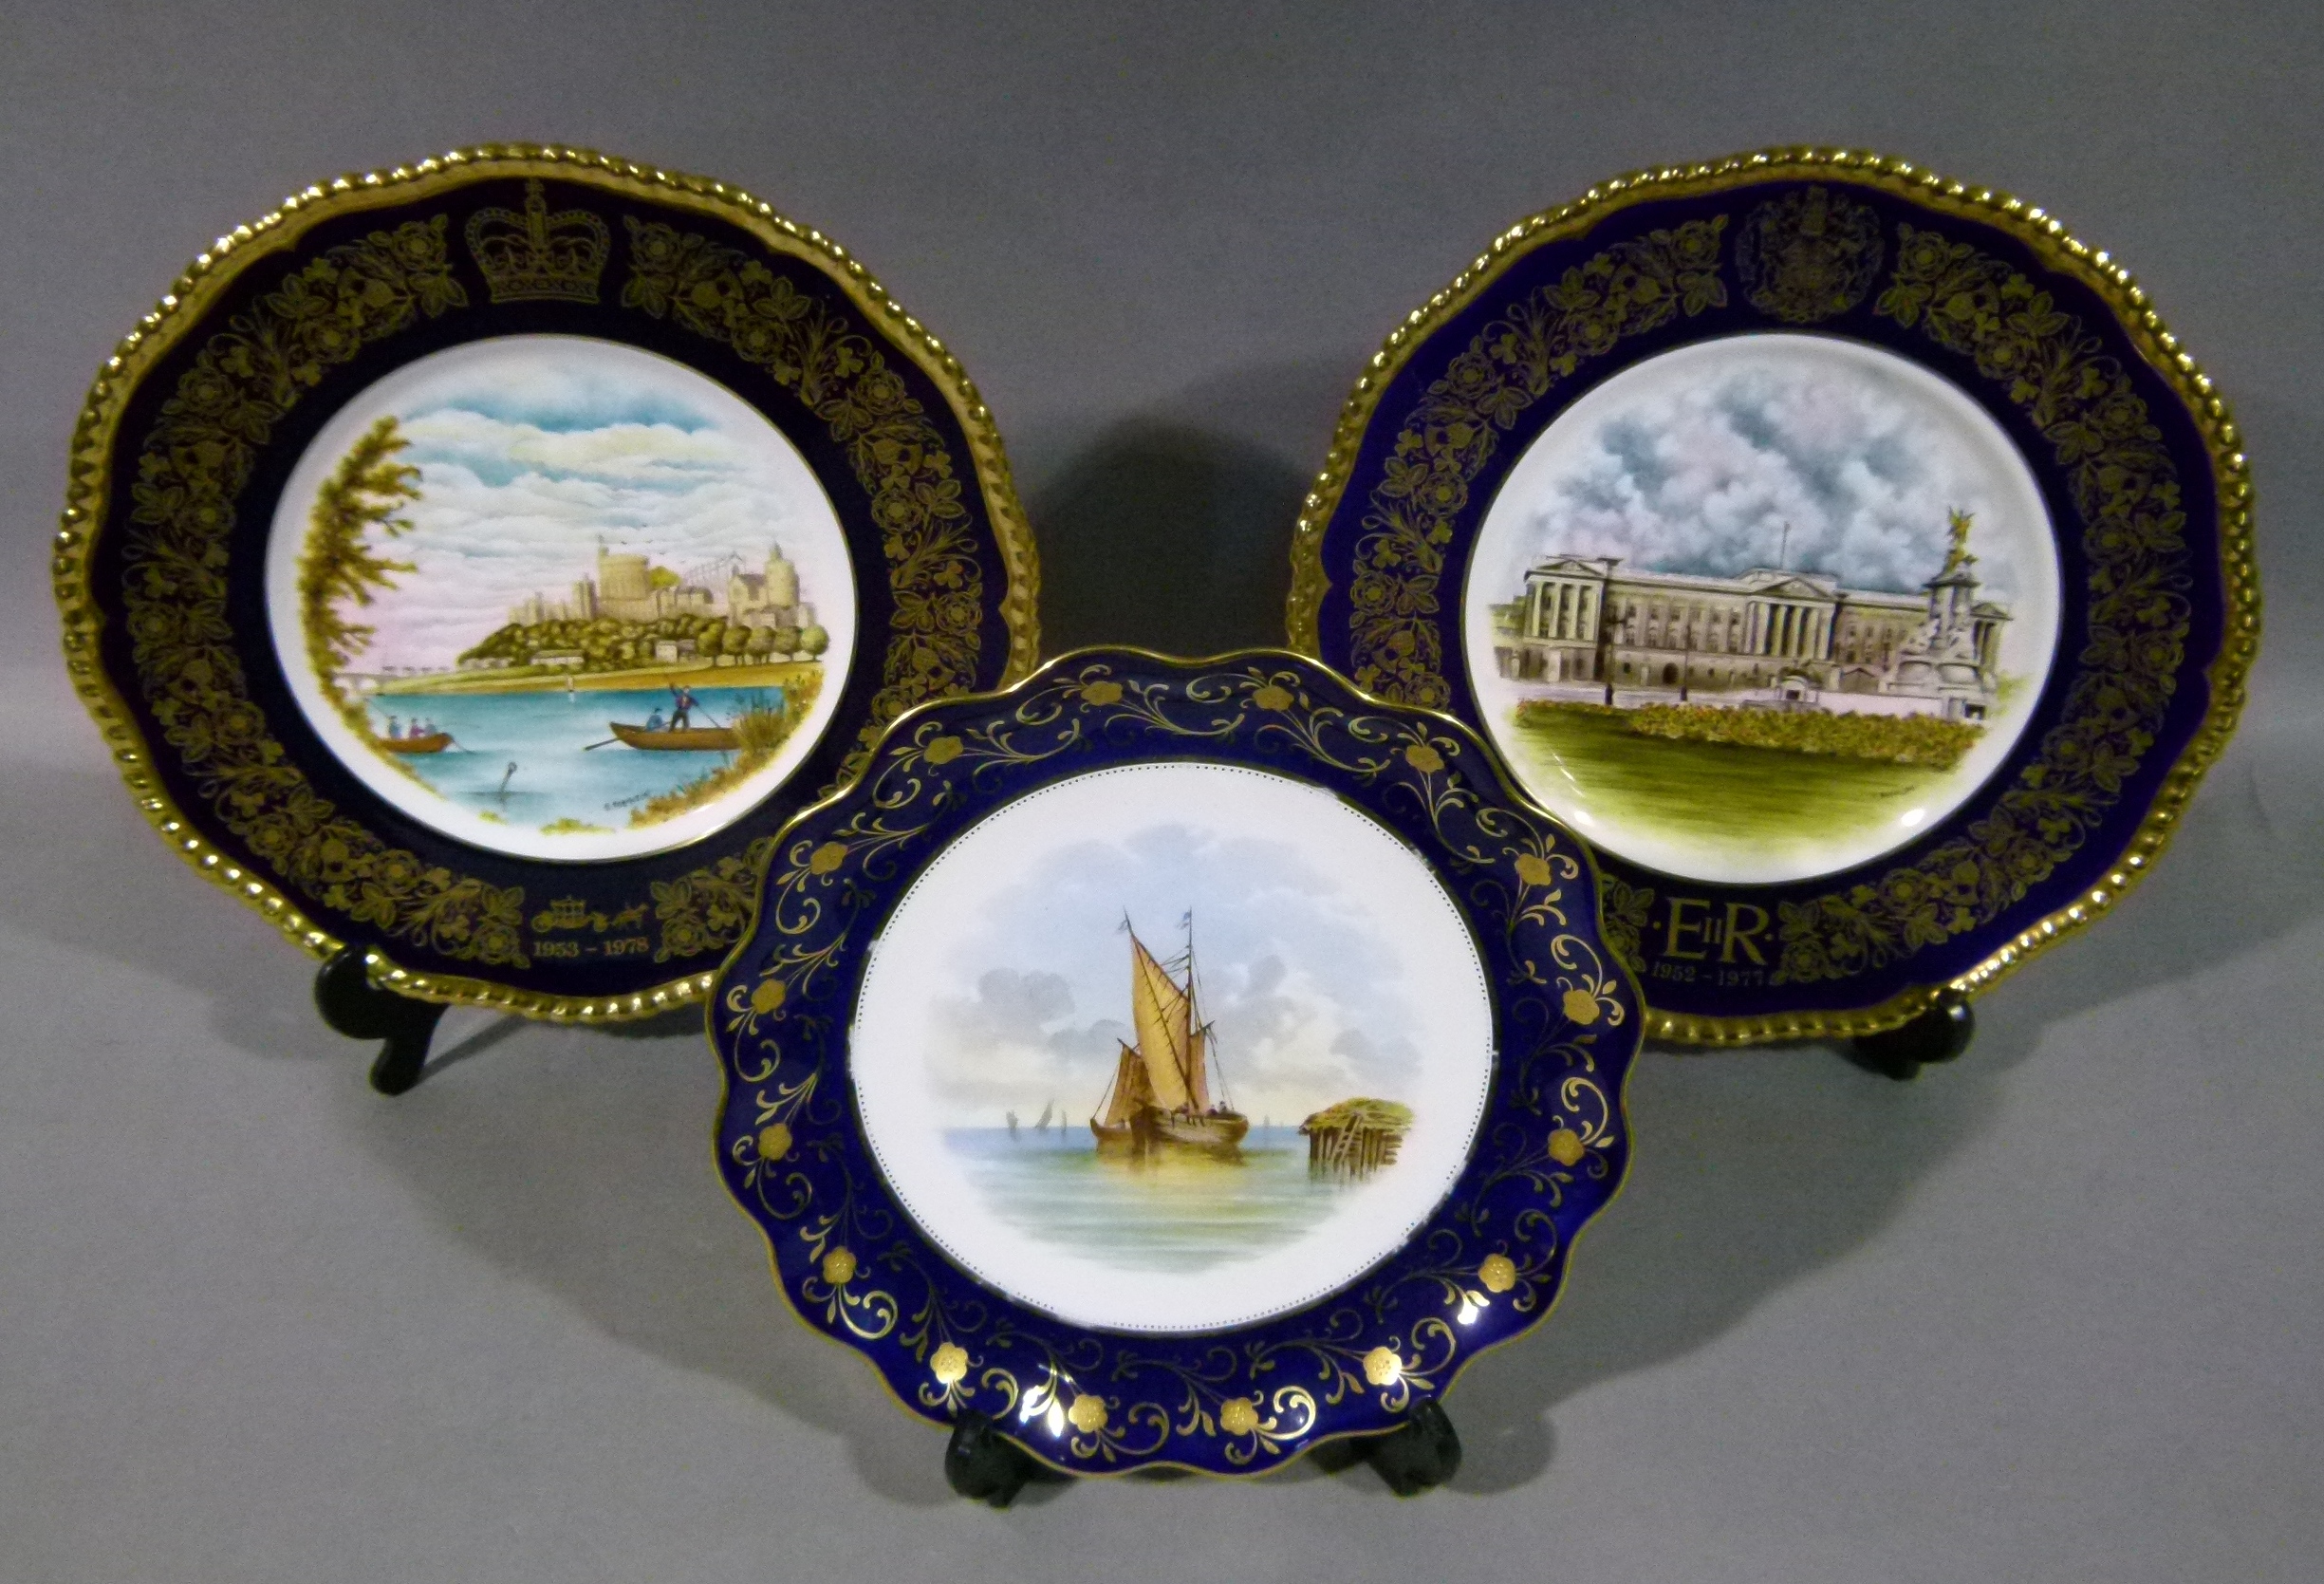 A Coalport commemorative plate - The Windsor Plate to commemorate the 25th anniversary of the